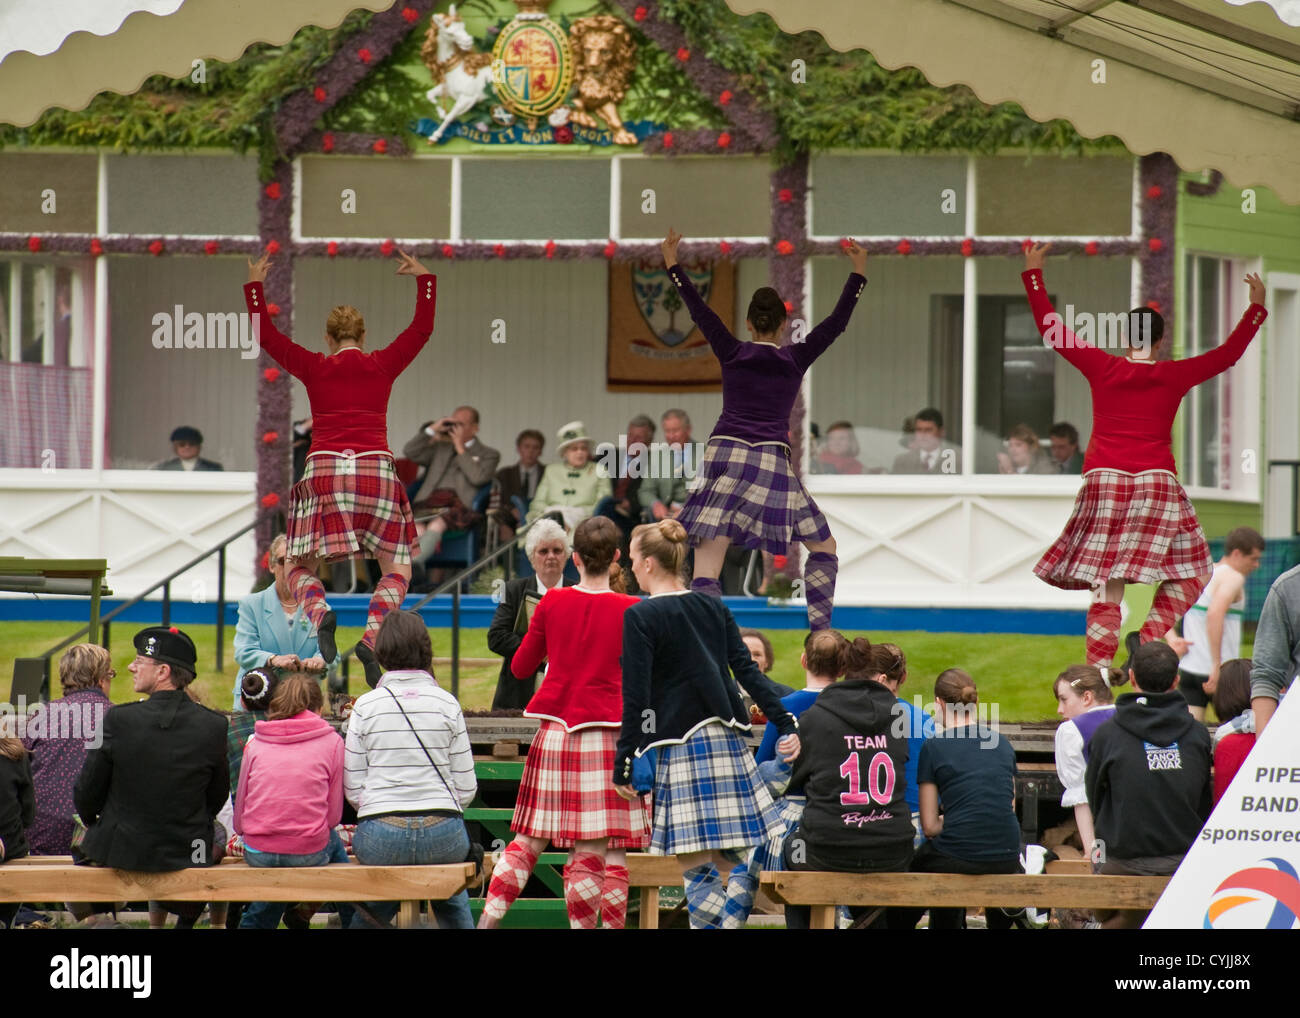 Scottish dancers performing in front of the Royal Family at the Braemar Highland Games ('Braemar Gathering'), Scotland Stock Photo